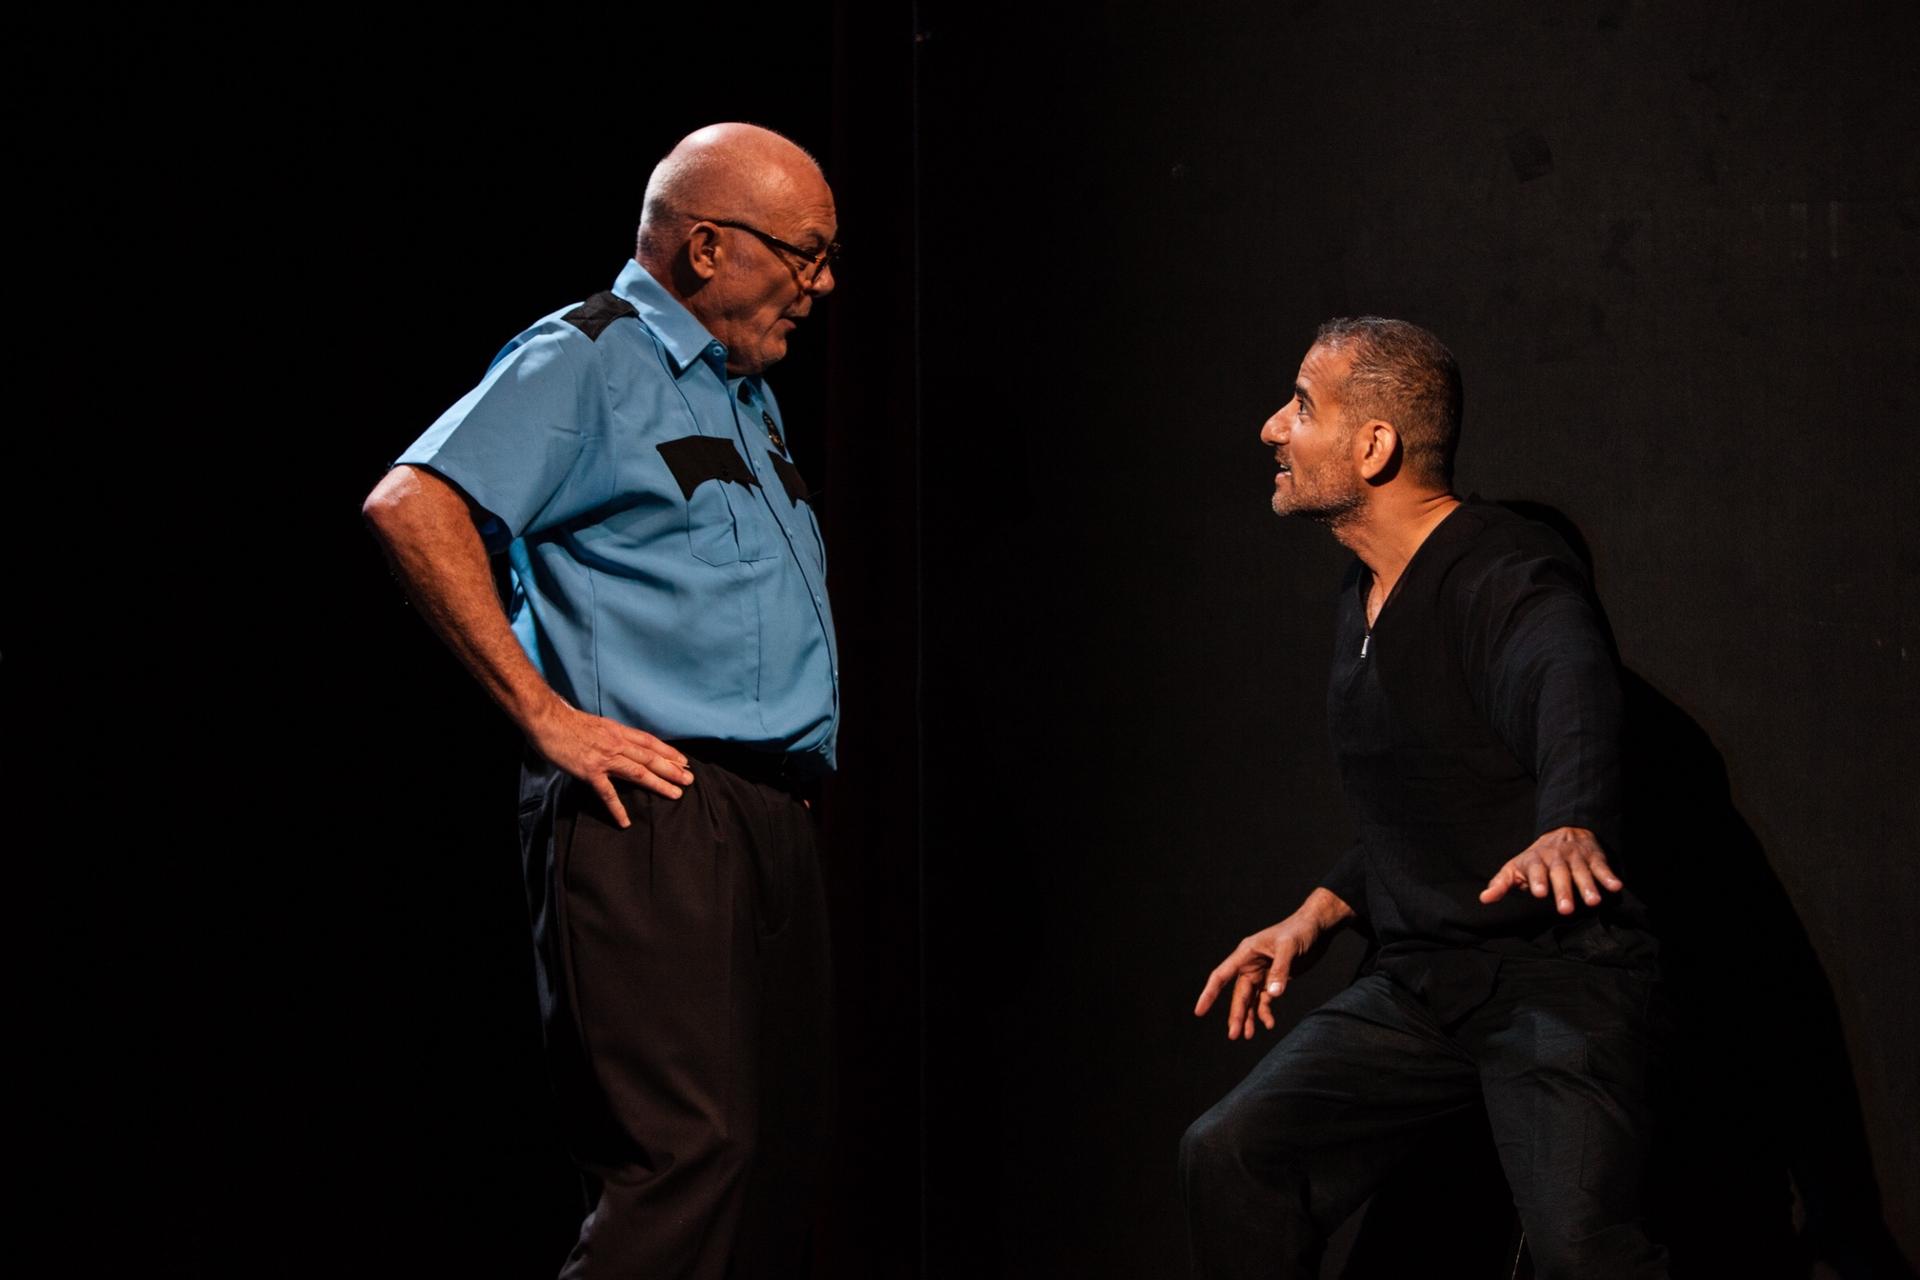 Actors Paul Costello, left, and Nabil Awad perform in a play "Counter Offence," that tackles police brutality and was staged at the Bay Area Drama Company. The theater's co-artistic director Basab Pradhan said the play was not well-attended.